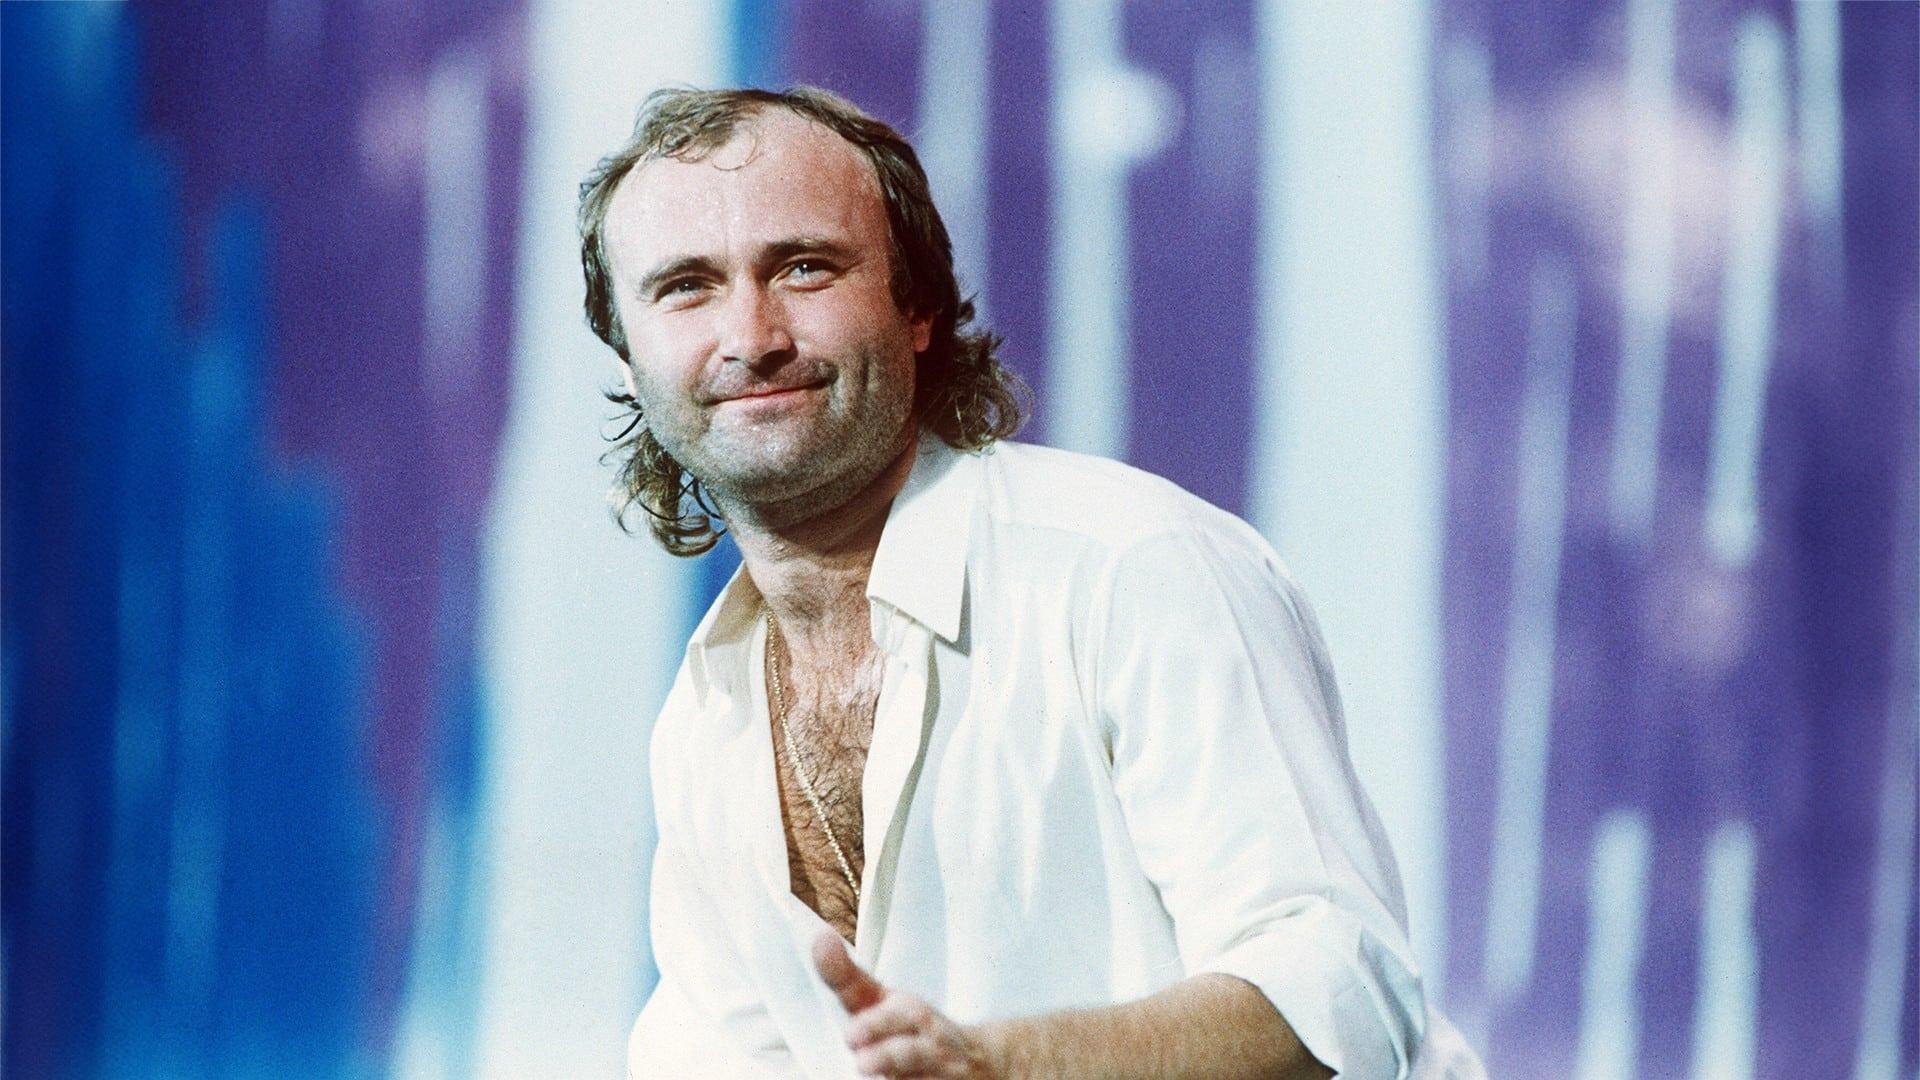 Phil Collins at the BBC backdrop